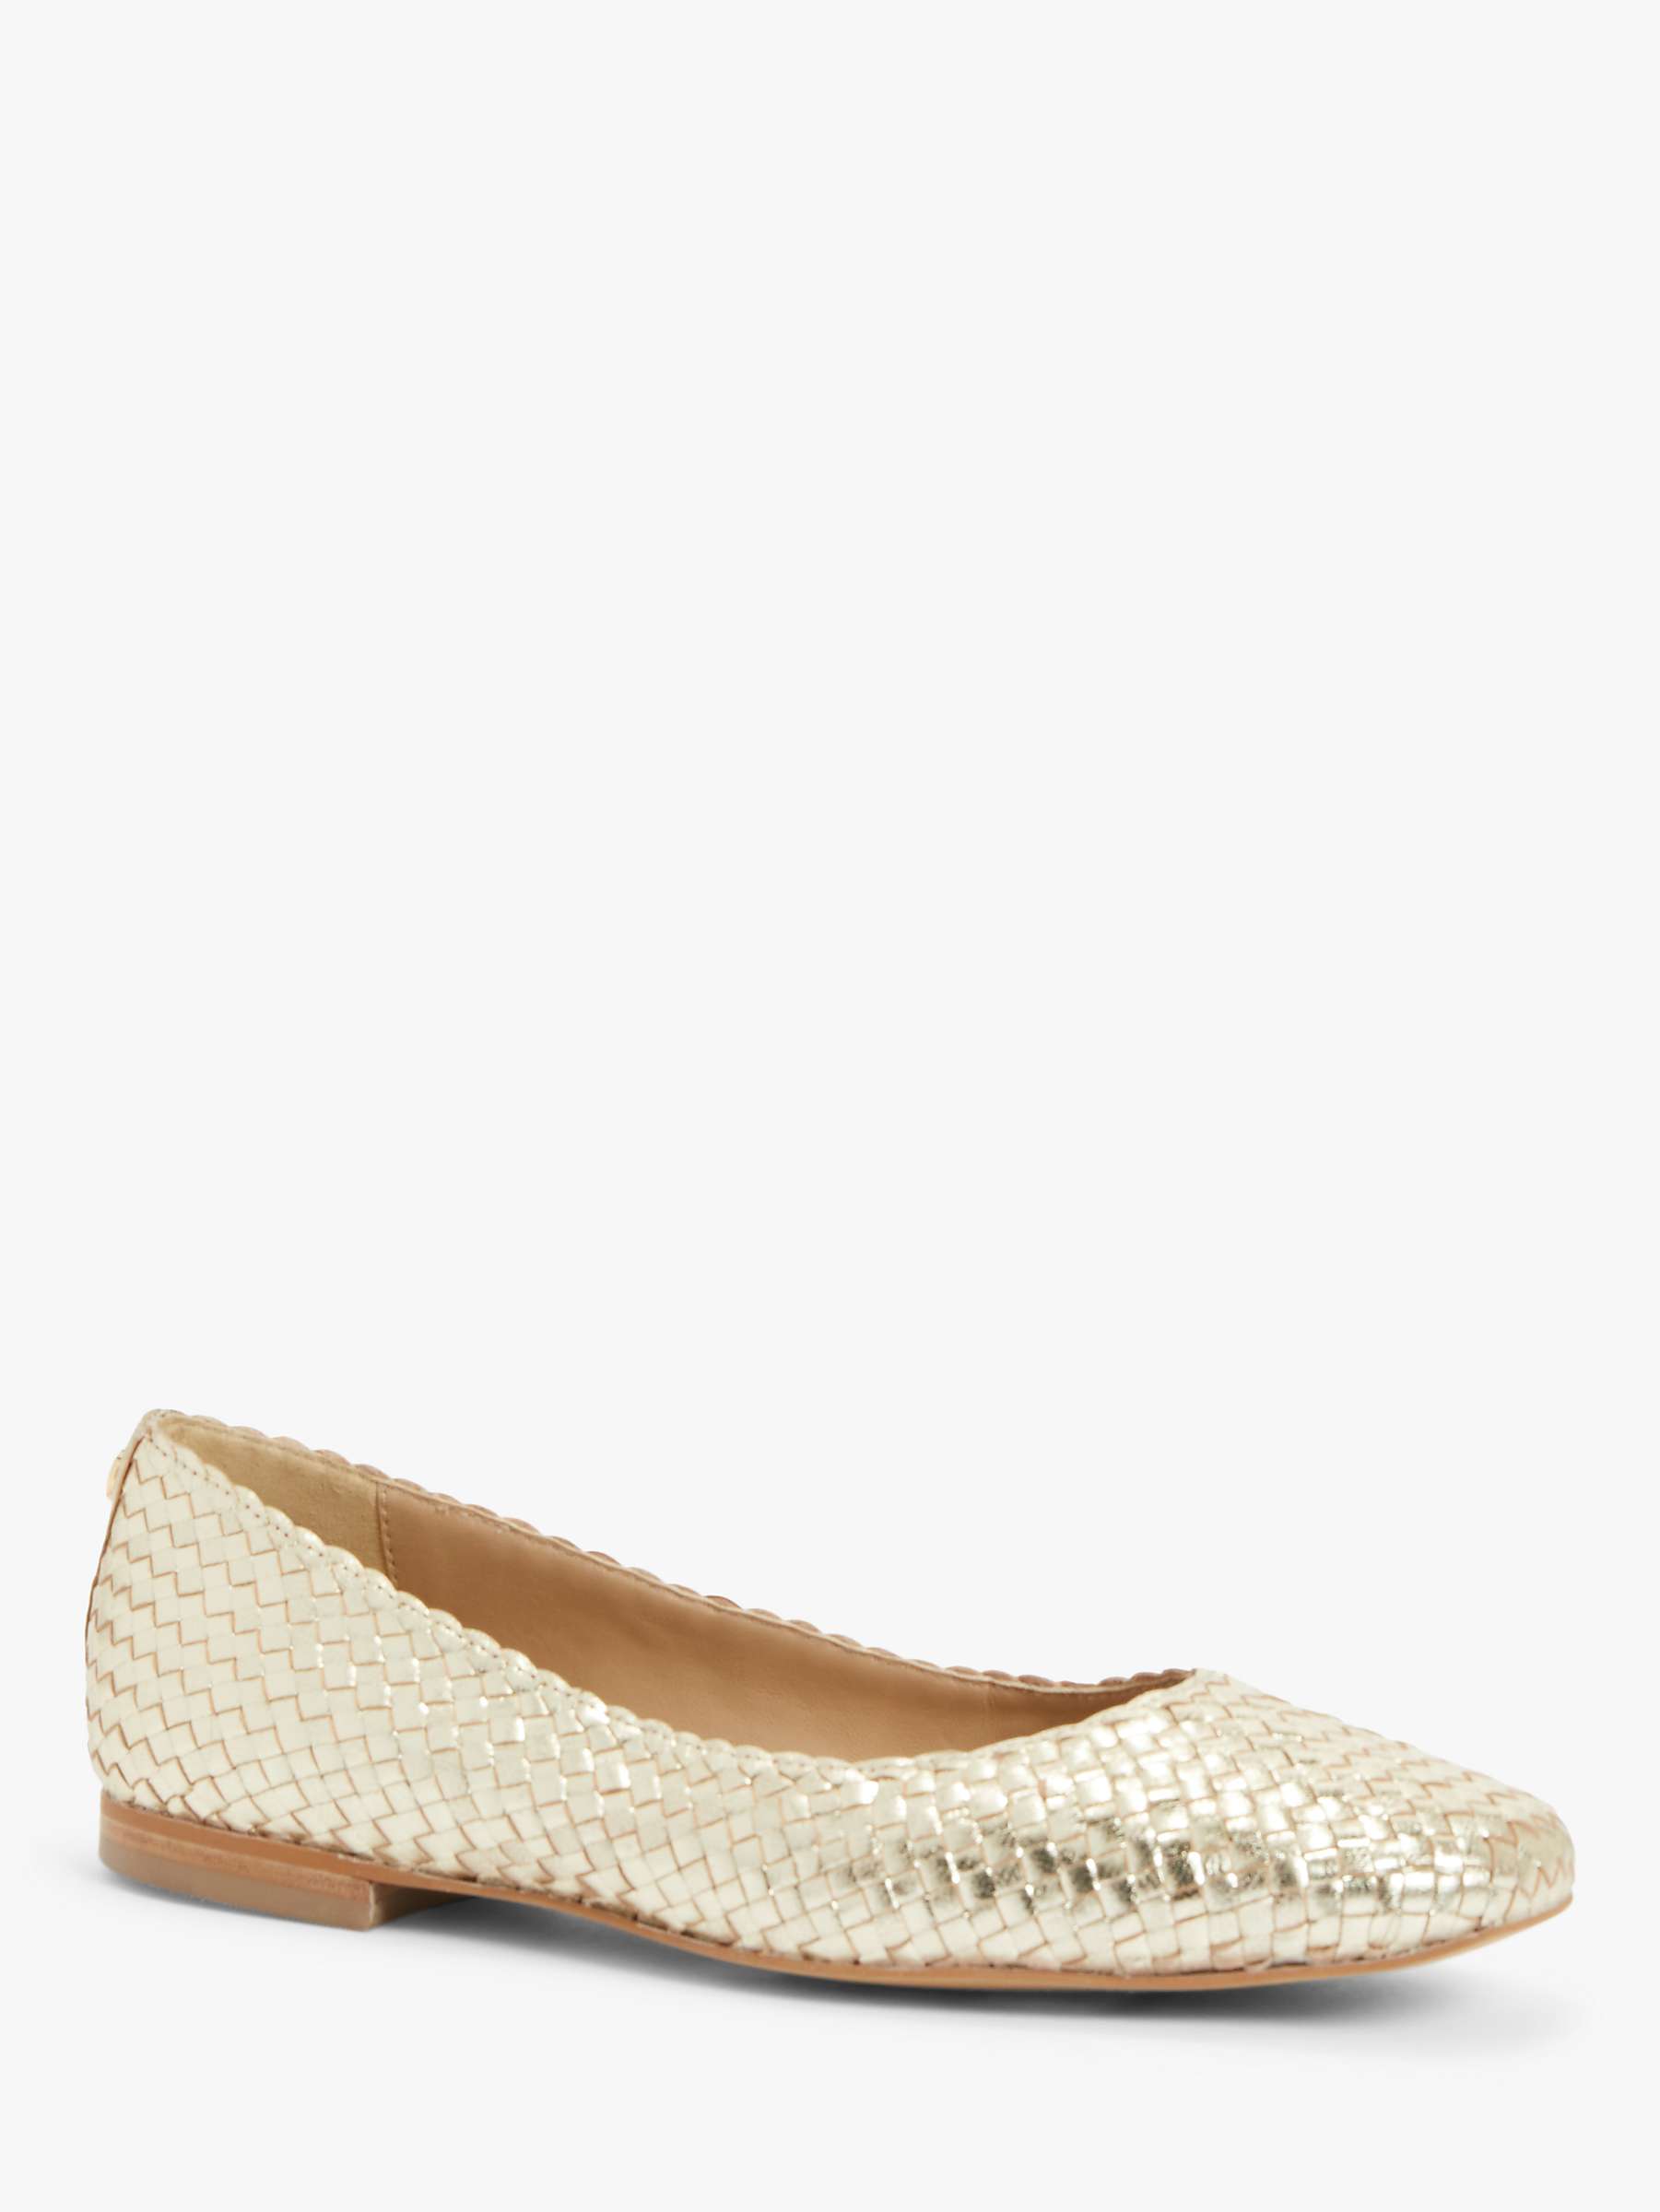 Buy John Lewis Holly Leather Woven Ballerina Pumps, Gold Online at johnlewis.com